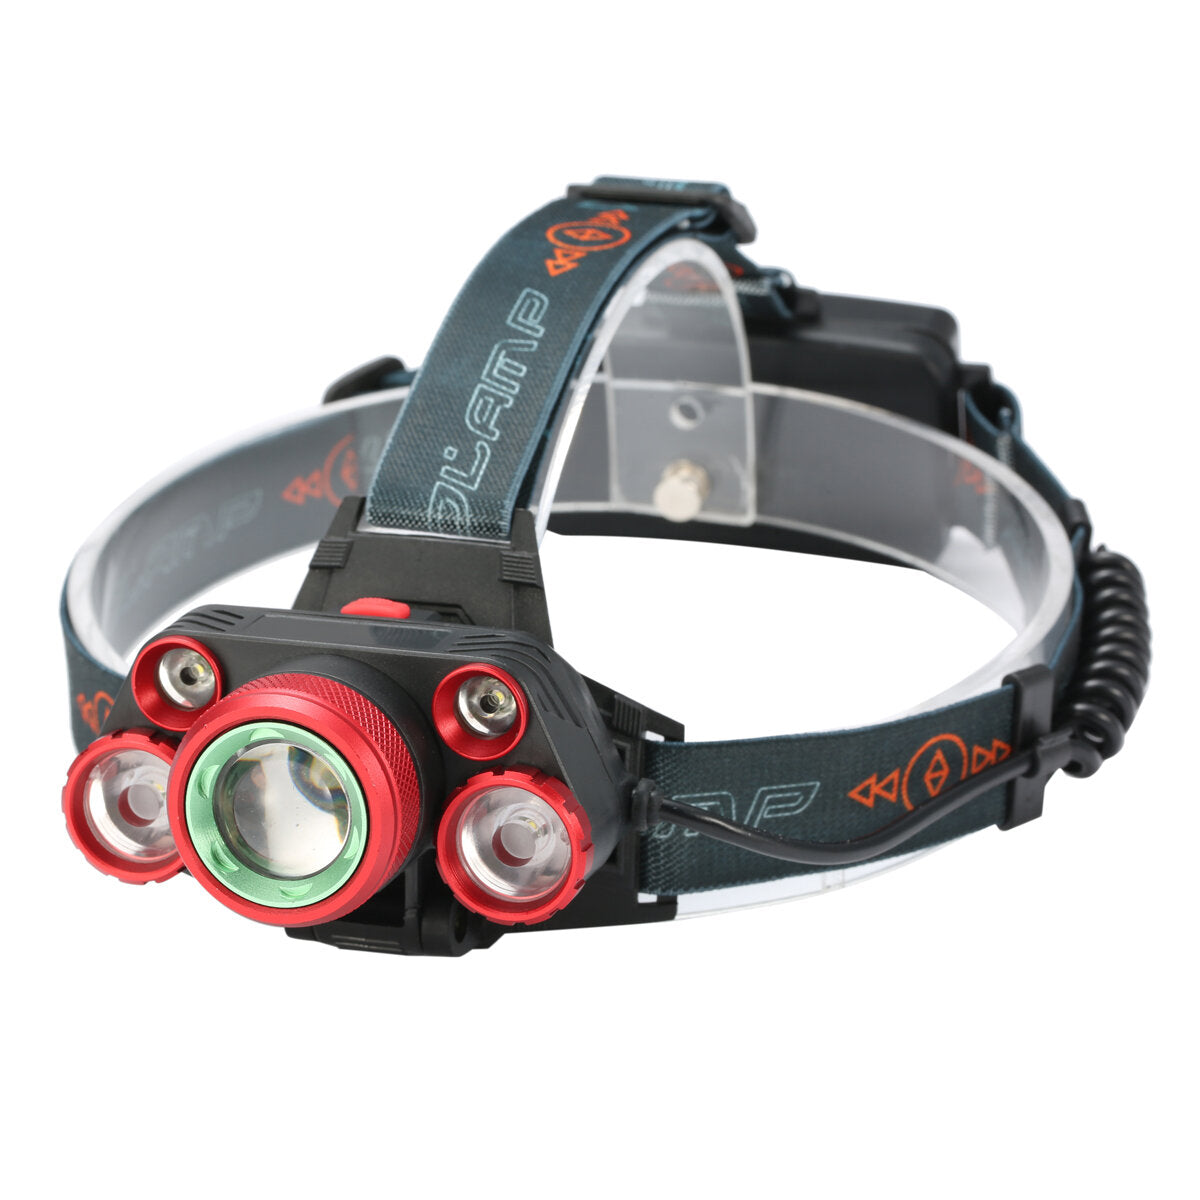 1000LM 5 LED Headlight 5 Modes Adjustable Flashlight IPX6 Waterproof Rechargeable Work Lamp Outdoor Camping Cycling